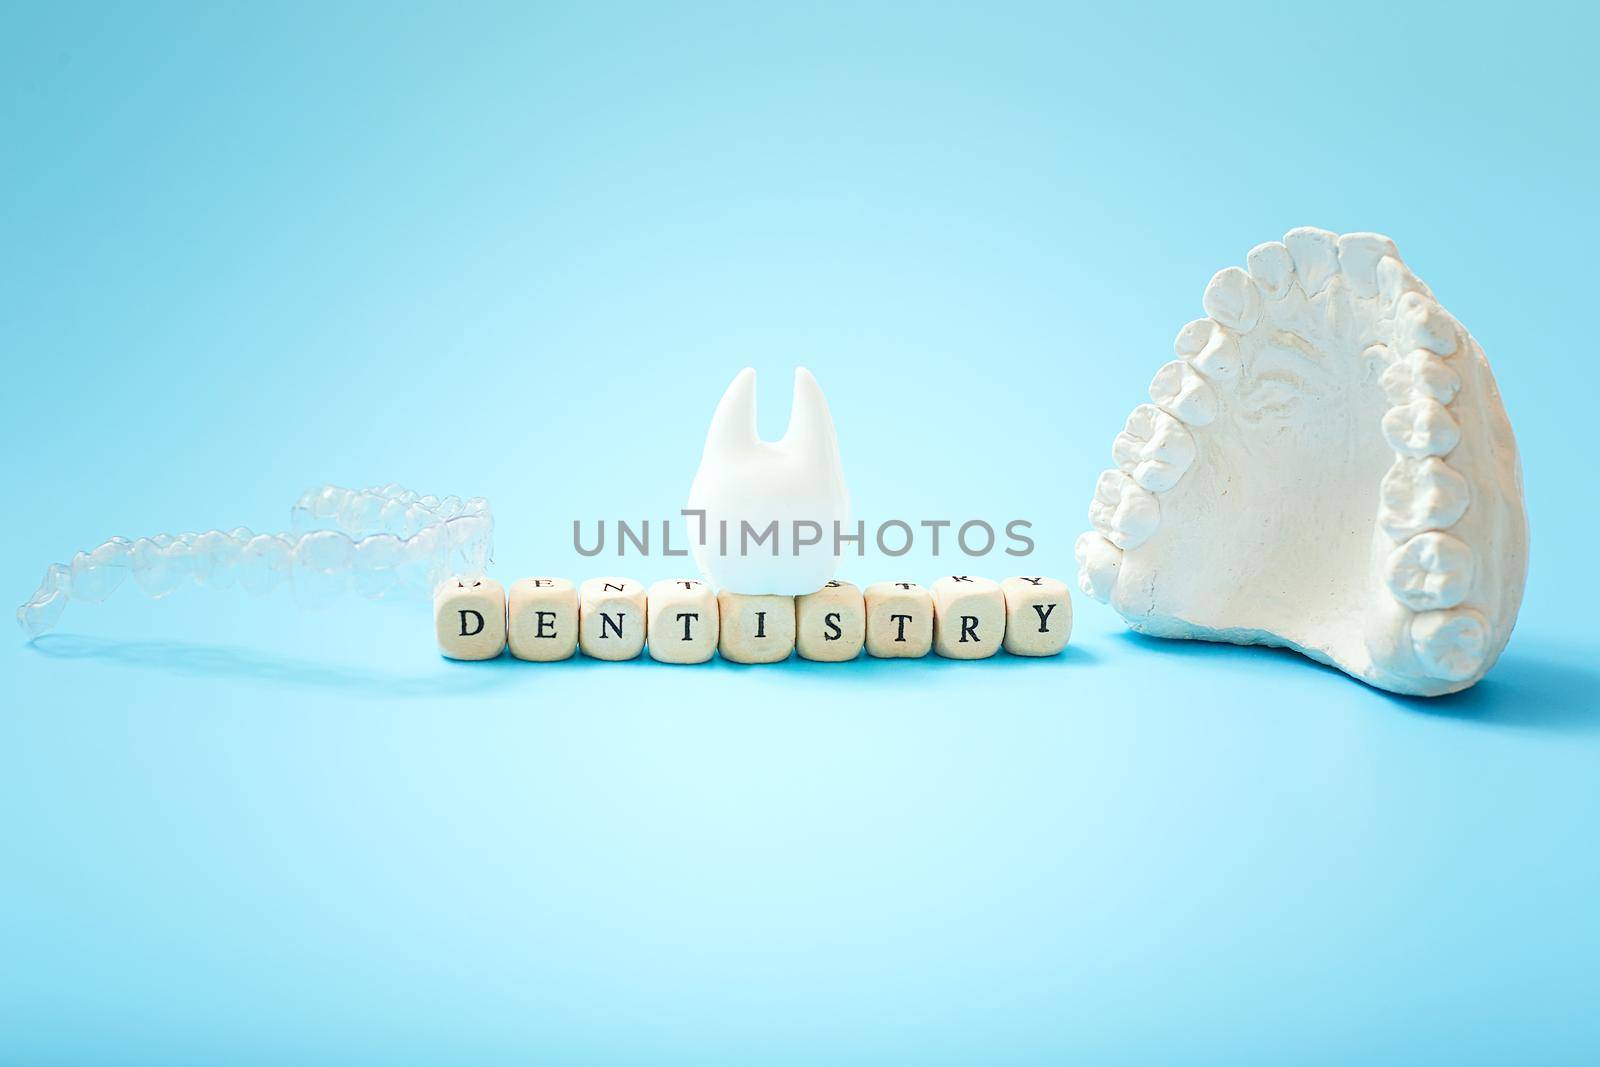 Dentist lettering for your advertisement on a blue background with invisible dental aligners or braces aplicable for an orthodontic dental treatment by Maximusnd